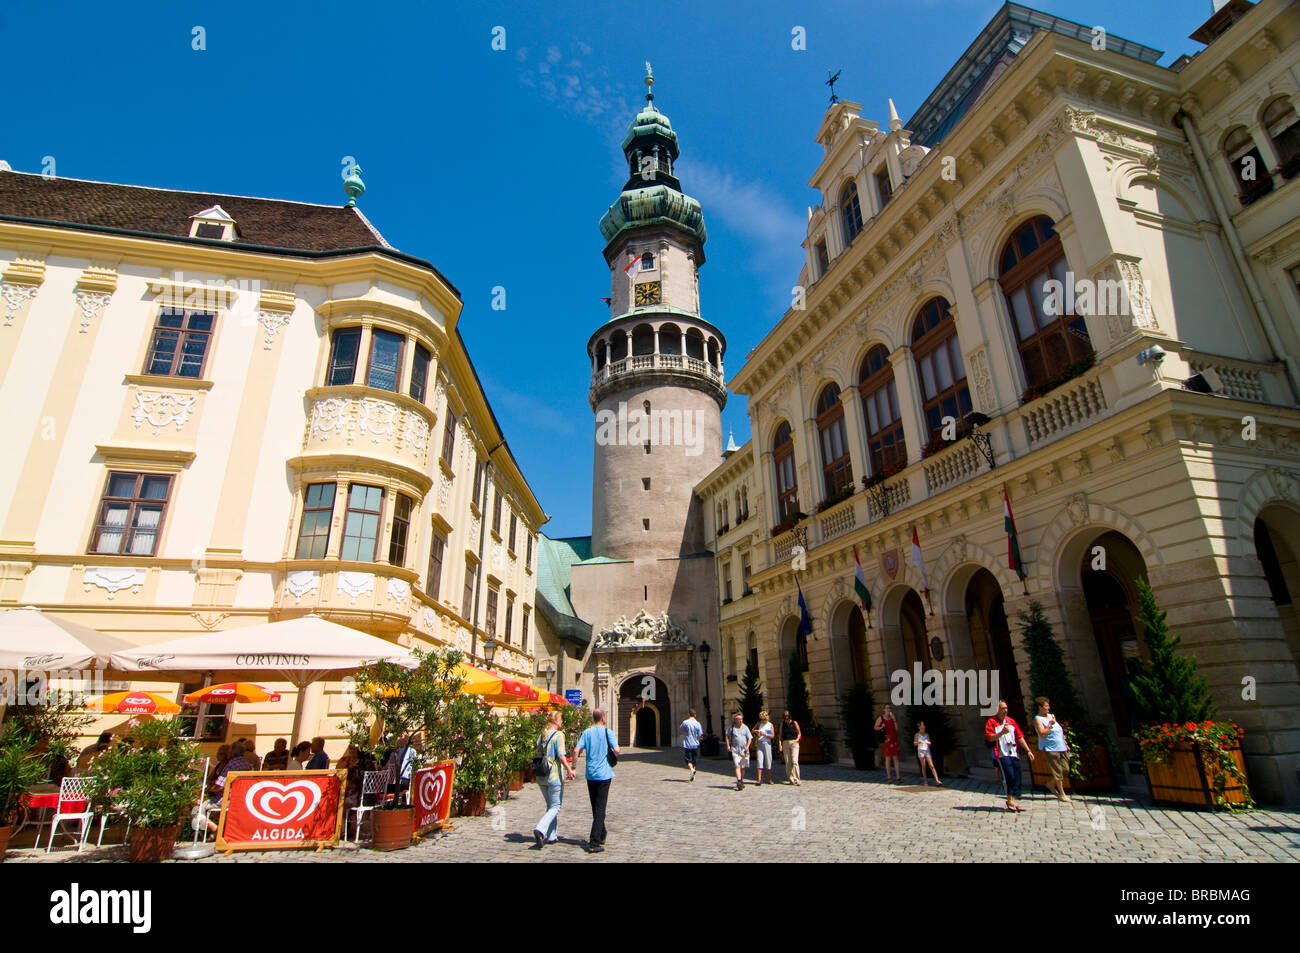 The Tuztorony, old fire tower in the town of Sopron, Hungary Stock Photo